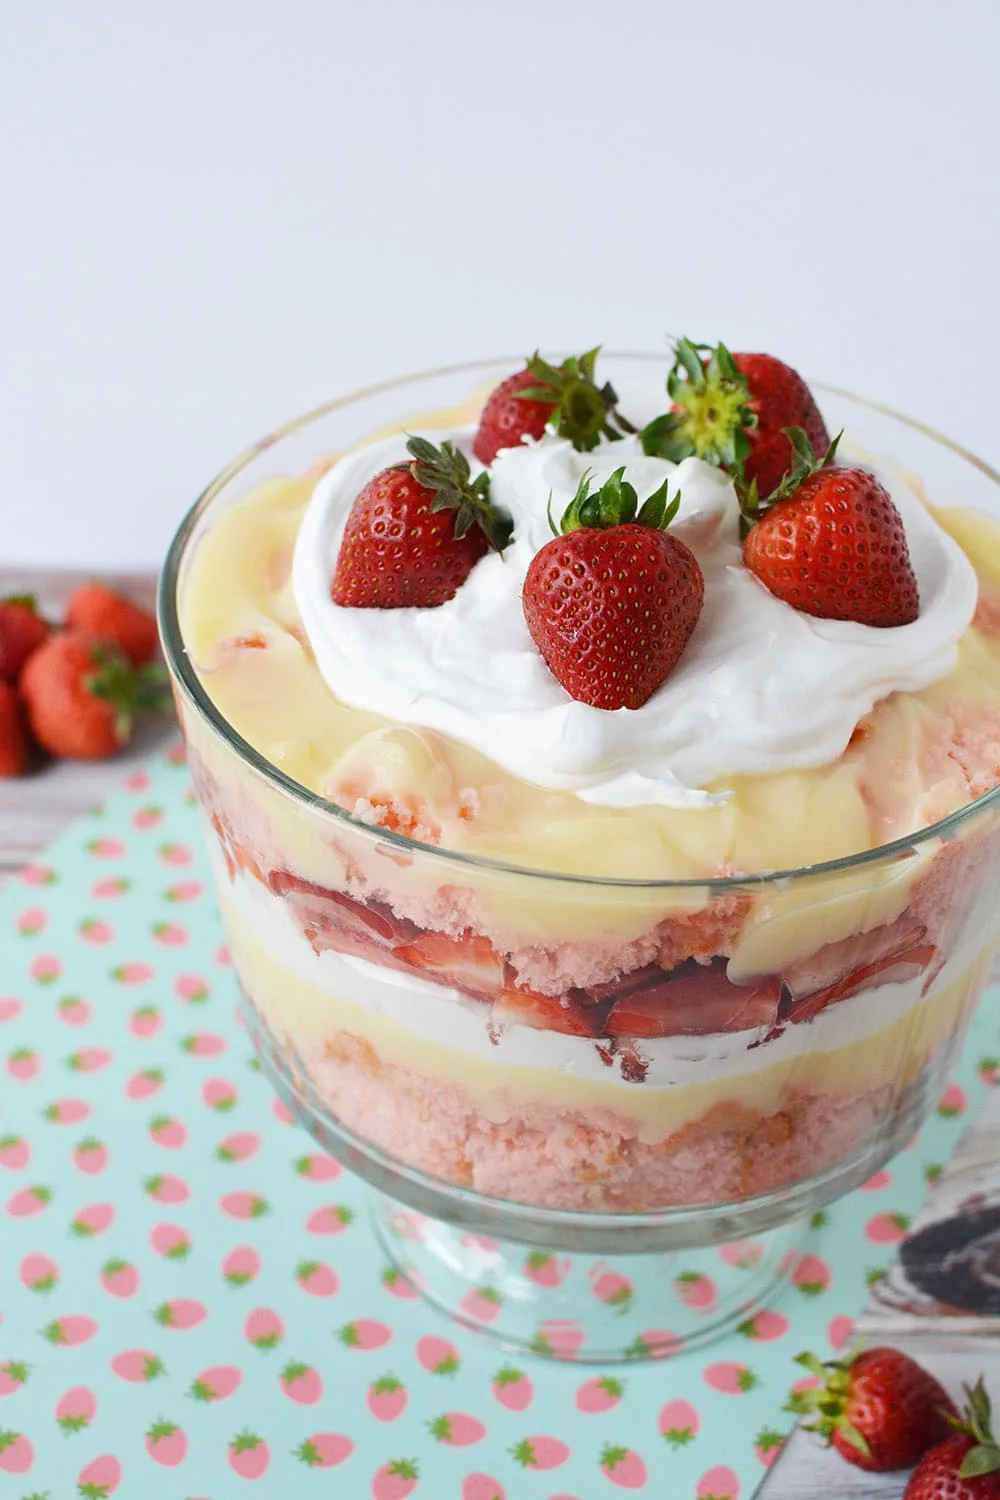 Layers of strawberry cake, cheesecake pudding, whipped cream, and strawberries in a trifle bowl